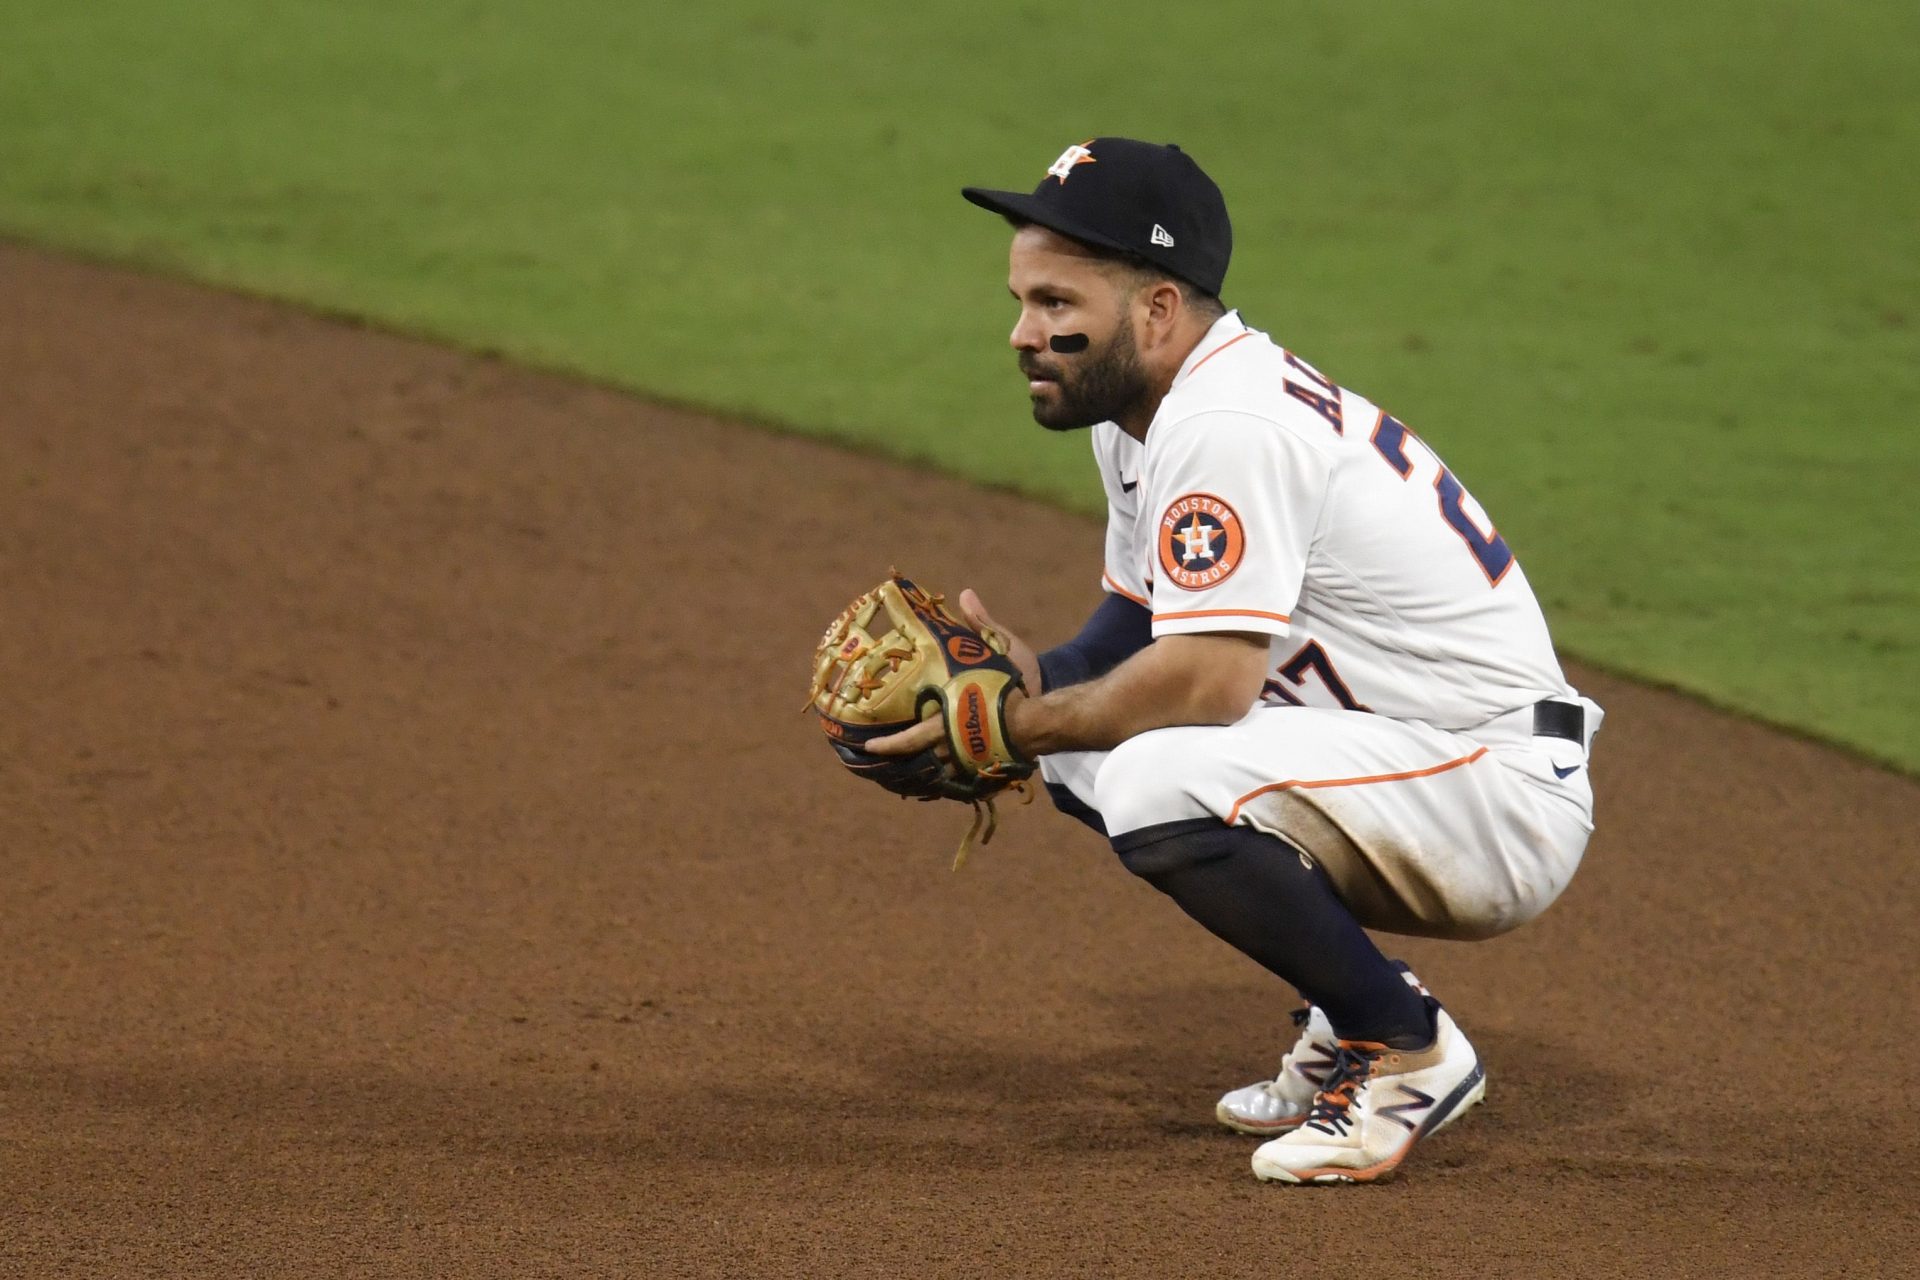 Invent you suspect in karma? Astros could per chance well per chance be undone by José Altuve’s unexpected throwing concerns